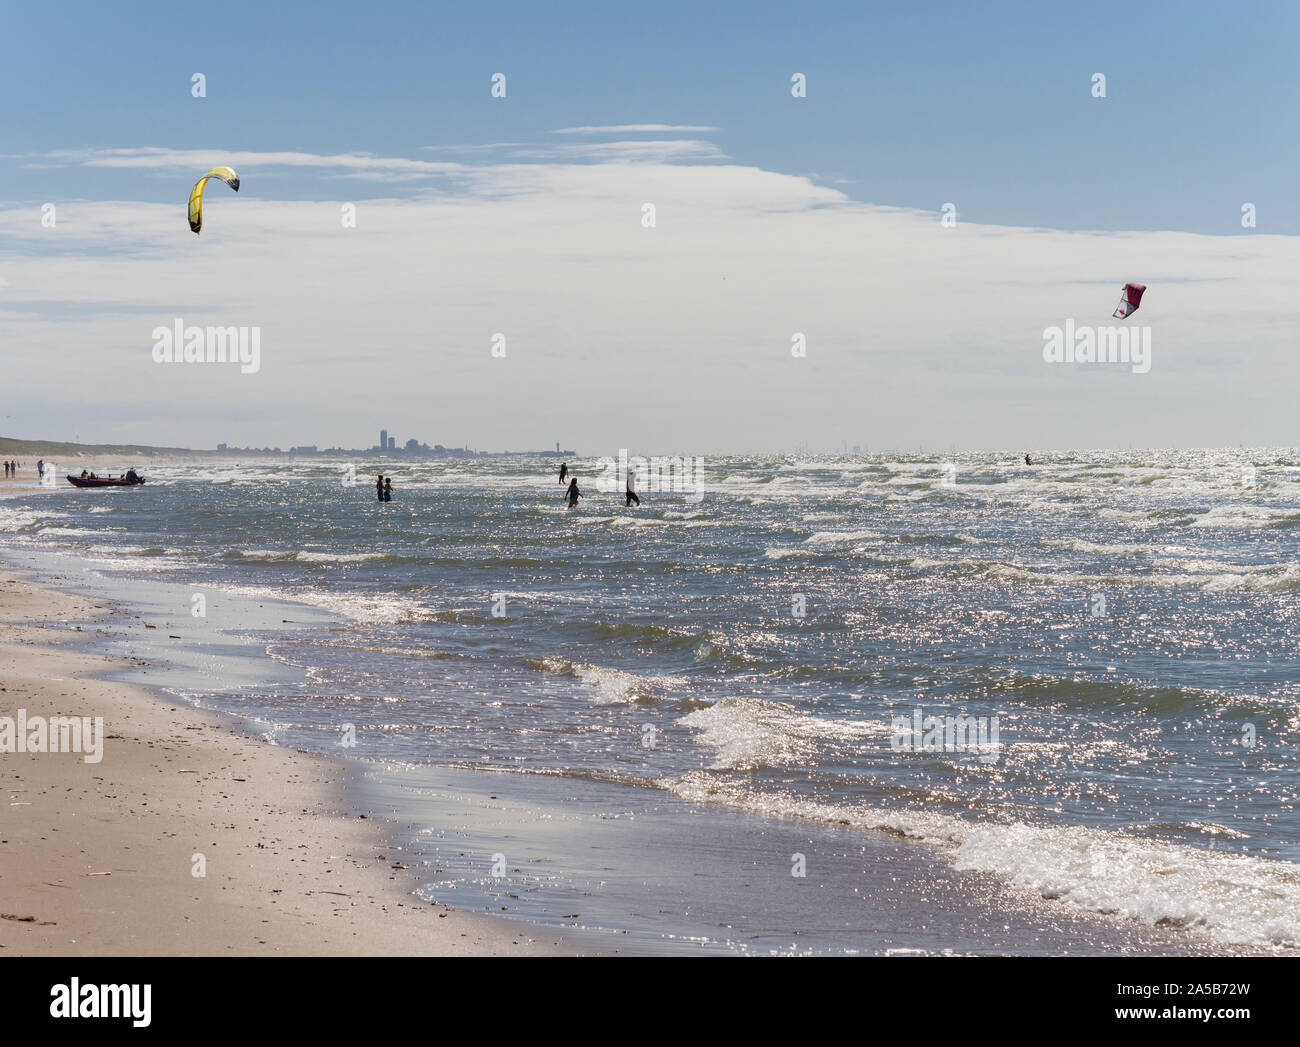 Passing in front of the city skyline of The Haag (Den Haag), kite surfers are enjoying the stormy North Sea on a beach at Katwijk, Netherlands. Stock Photo